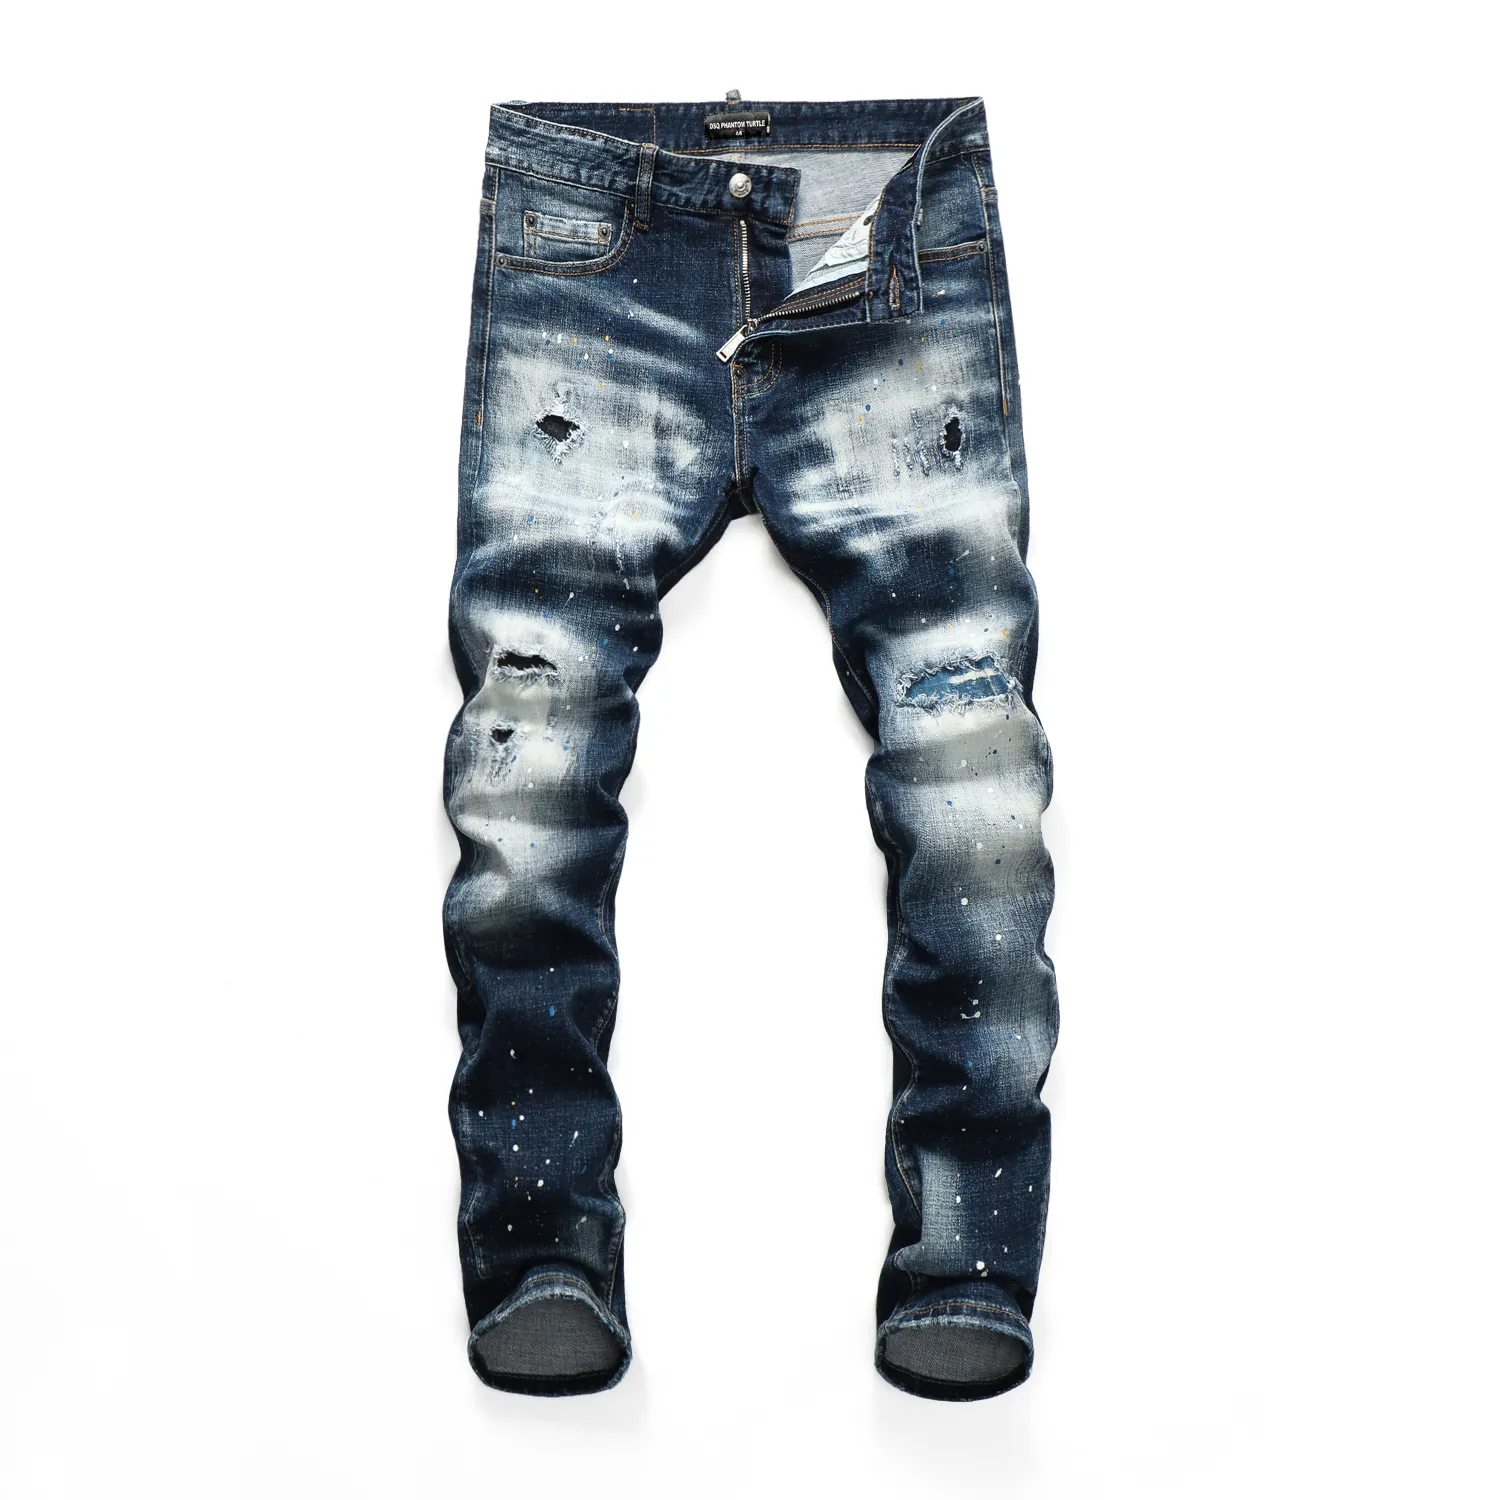 DSQ Phantom Turtle Jeans masculino Jeans Italiano Jeans Skinny Ripped Guy Caso Causal Hole Jeans Fit Fit Men Washed calça 65217